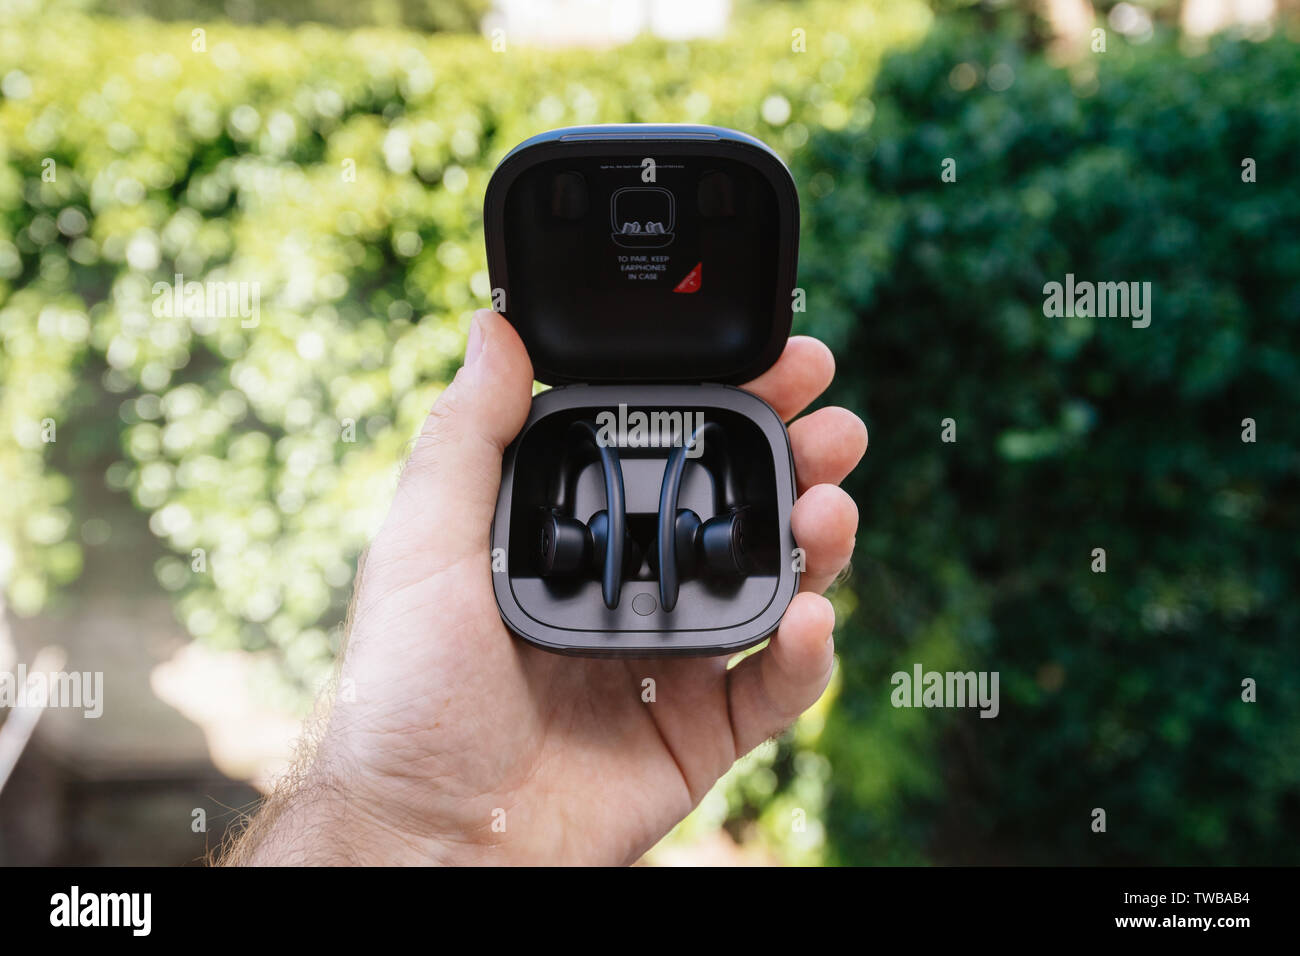 Paris, France - Jun 17, 2019: Powerbeats Pro Beats by Dr Dre wireless high-performance earphones charging case after unboxing man hand holding admiring the new music device Stock Photo